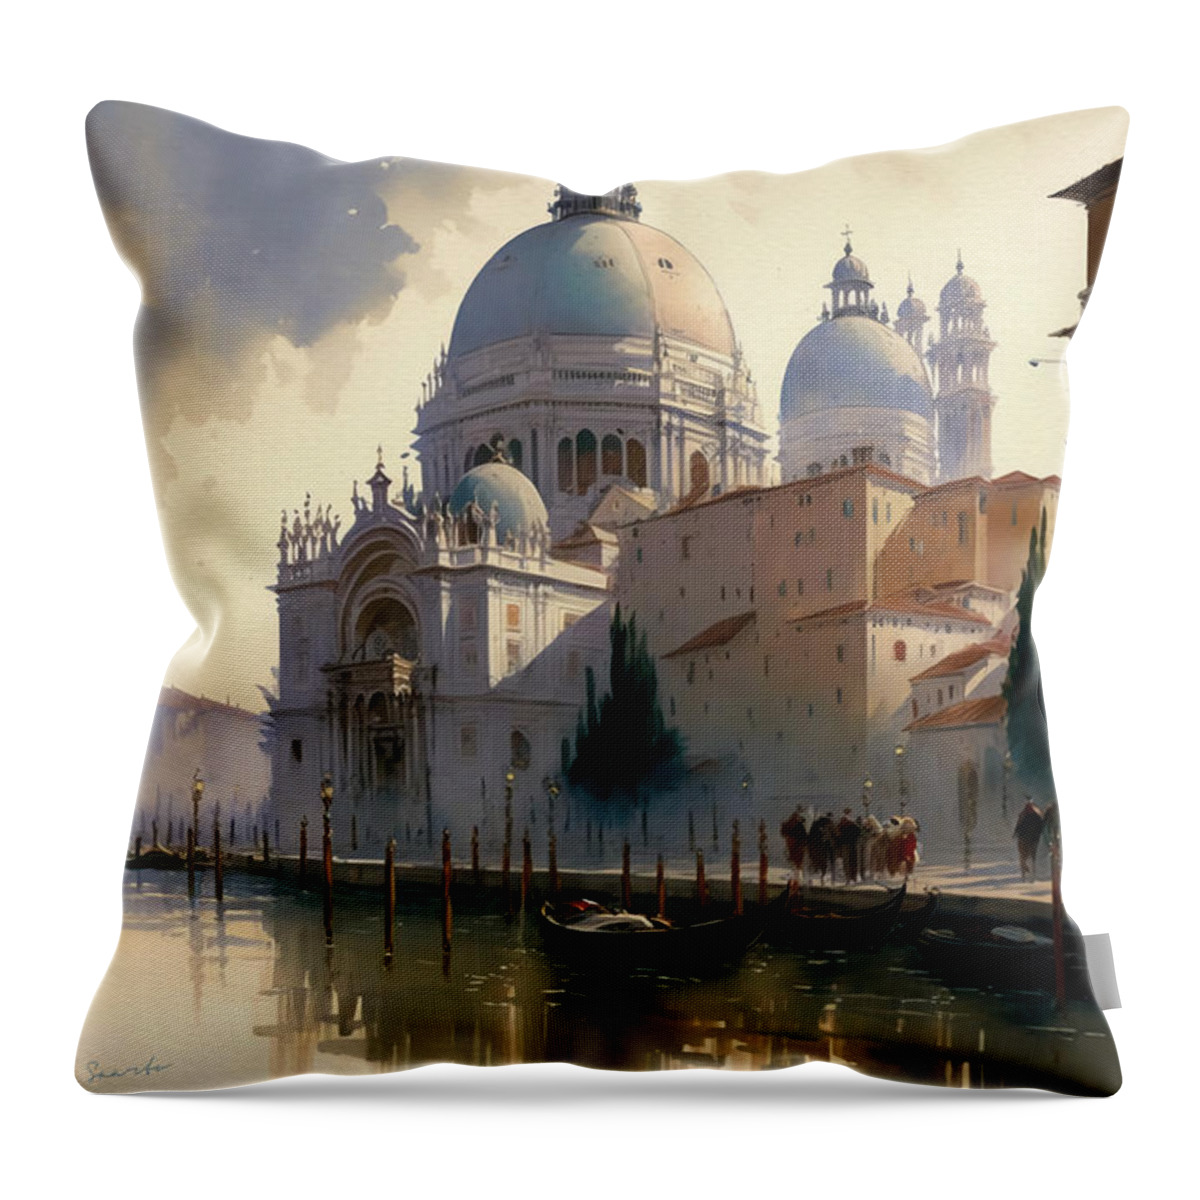 Building Exterio Throw Pillow featuring the digital art View of Canal Grande by Kai Saarto